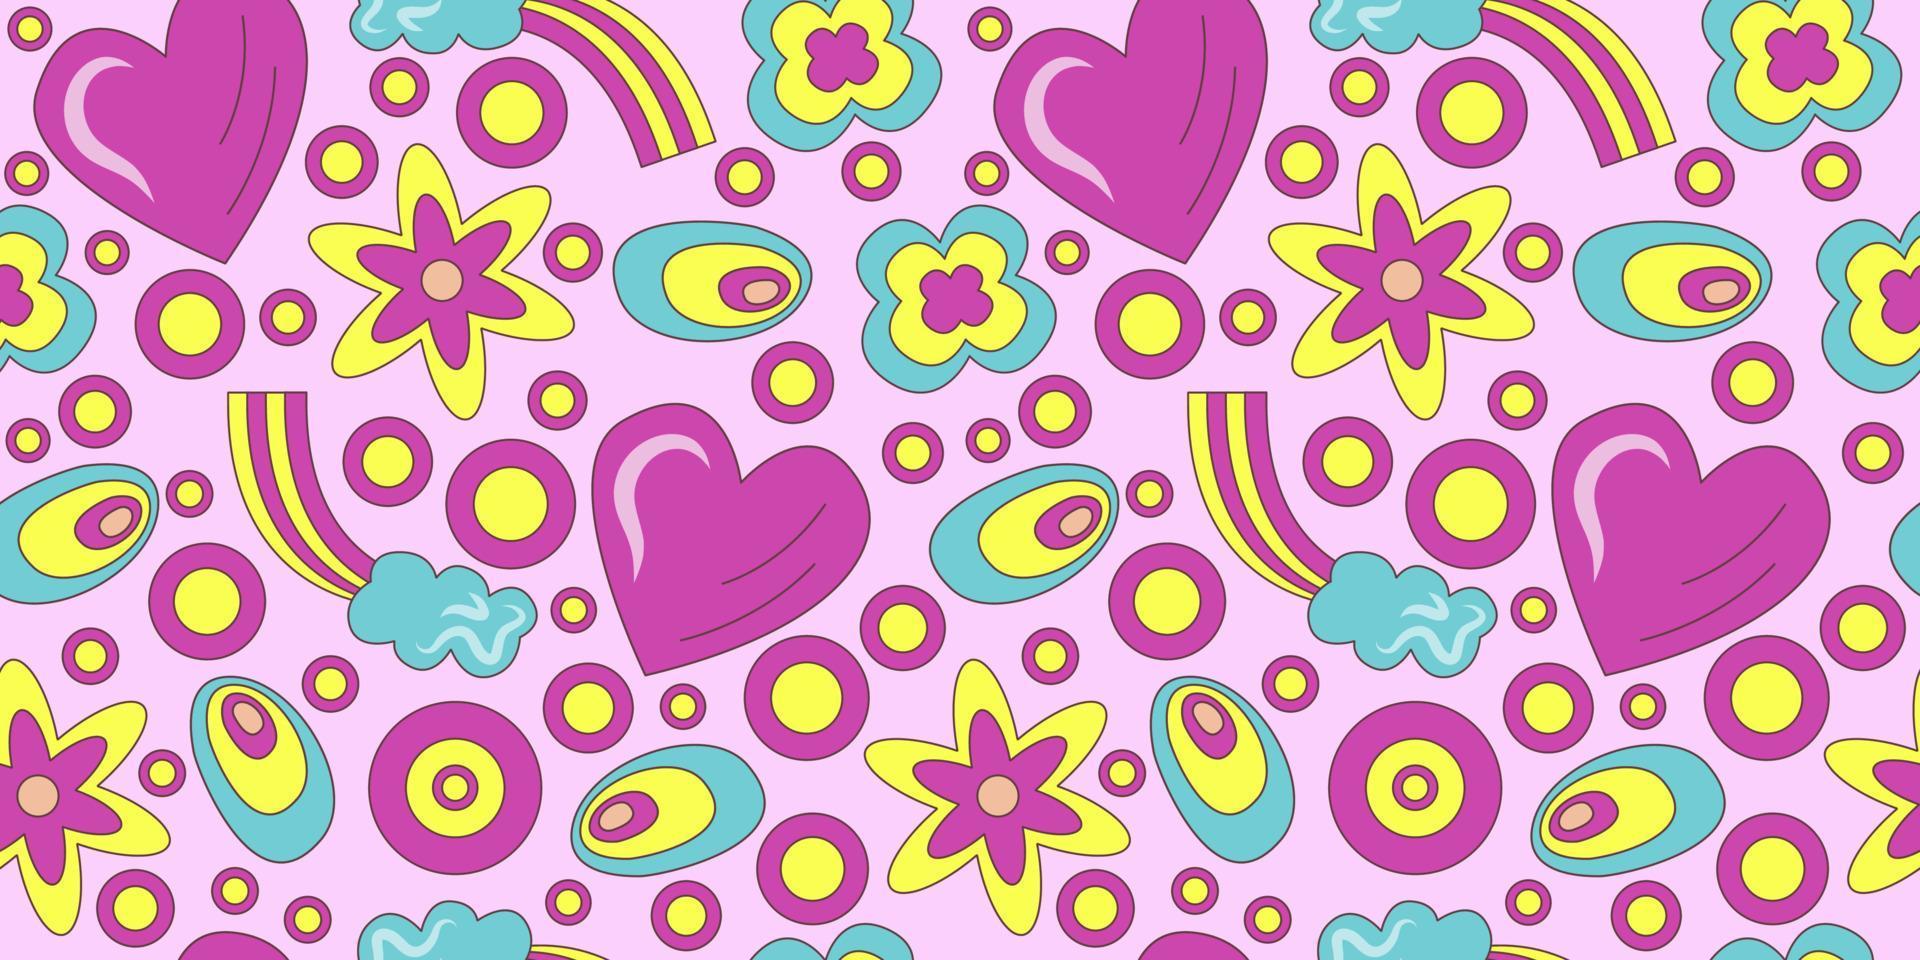 Groovy pattern in doodle style on colorful background. 70s retro floral seamless pattern with heart and rainbow. Simple vector groovy illustration